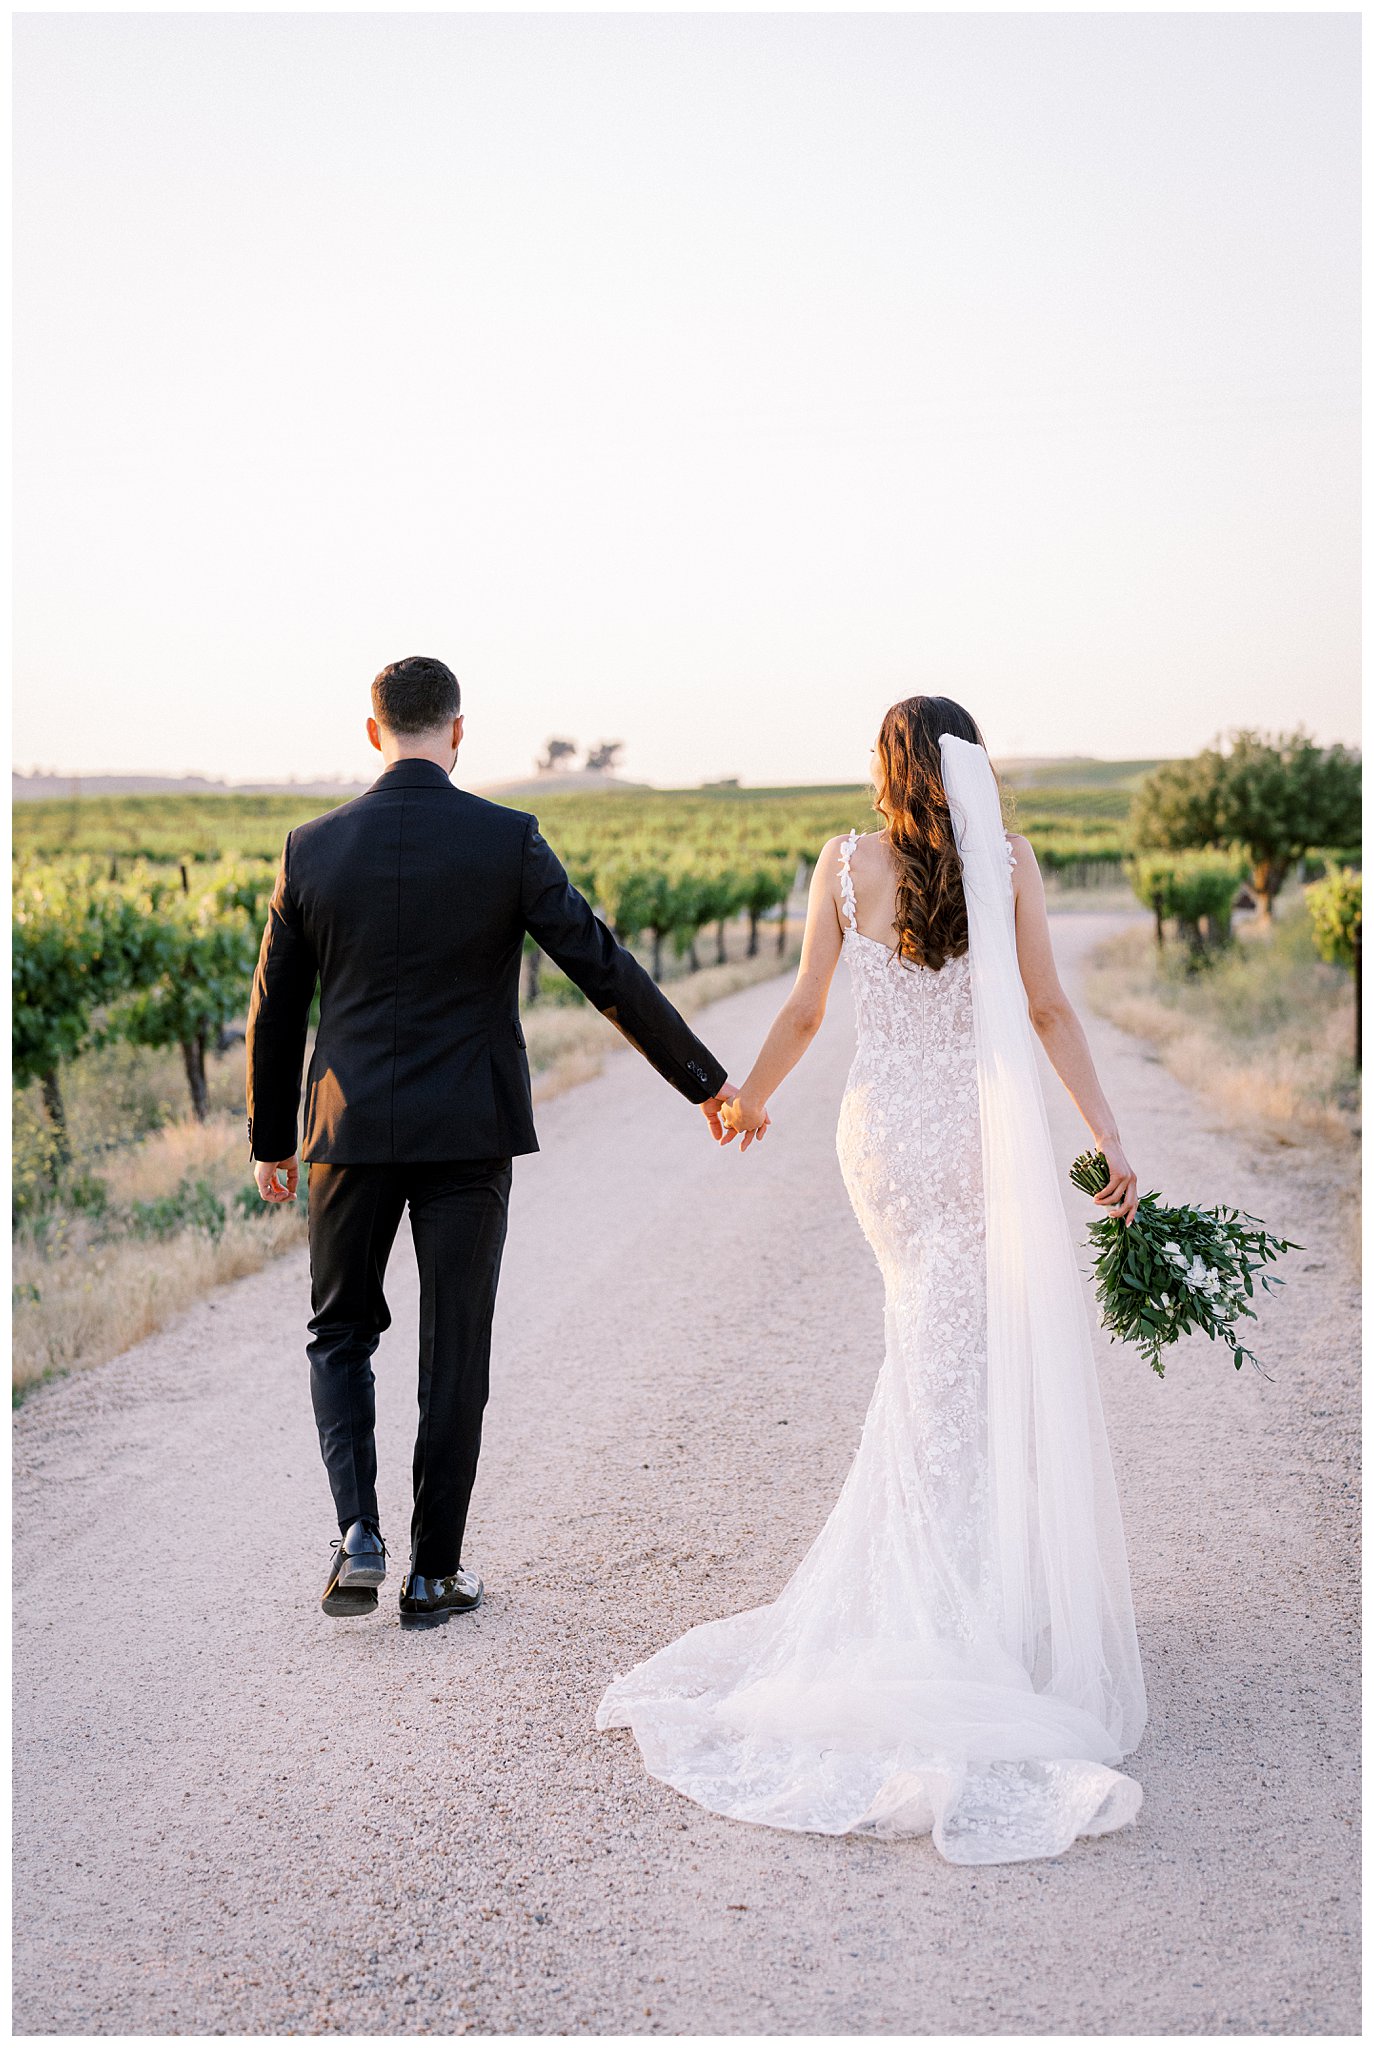 A bride and groom walk through the vineyards during their luxury wedding day at Bella Terra Vineyards, in Paso Robles, California.